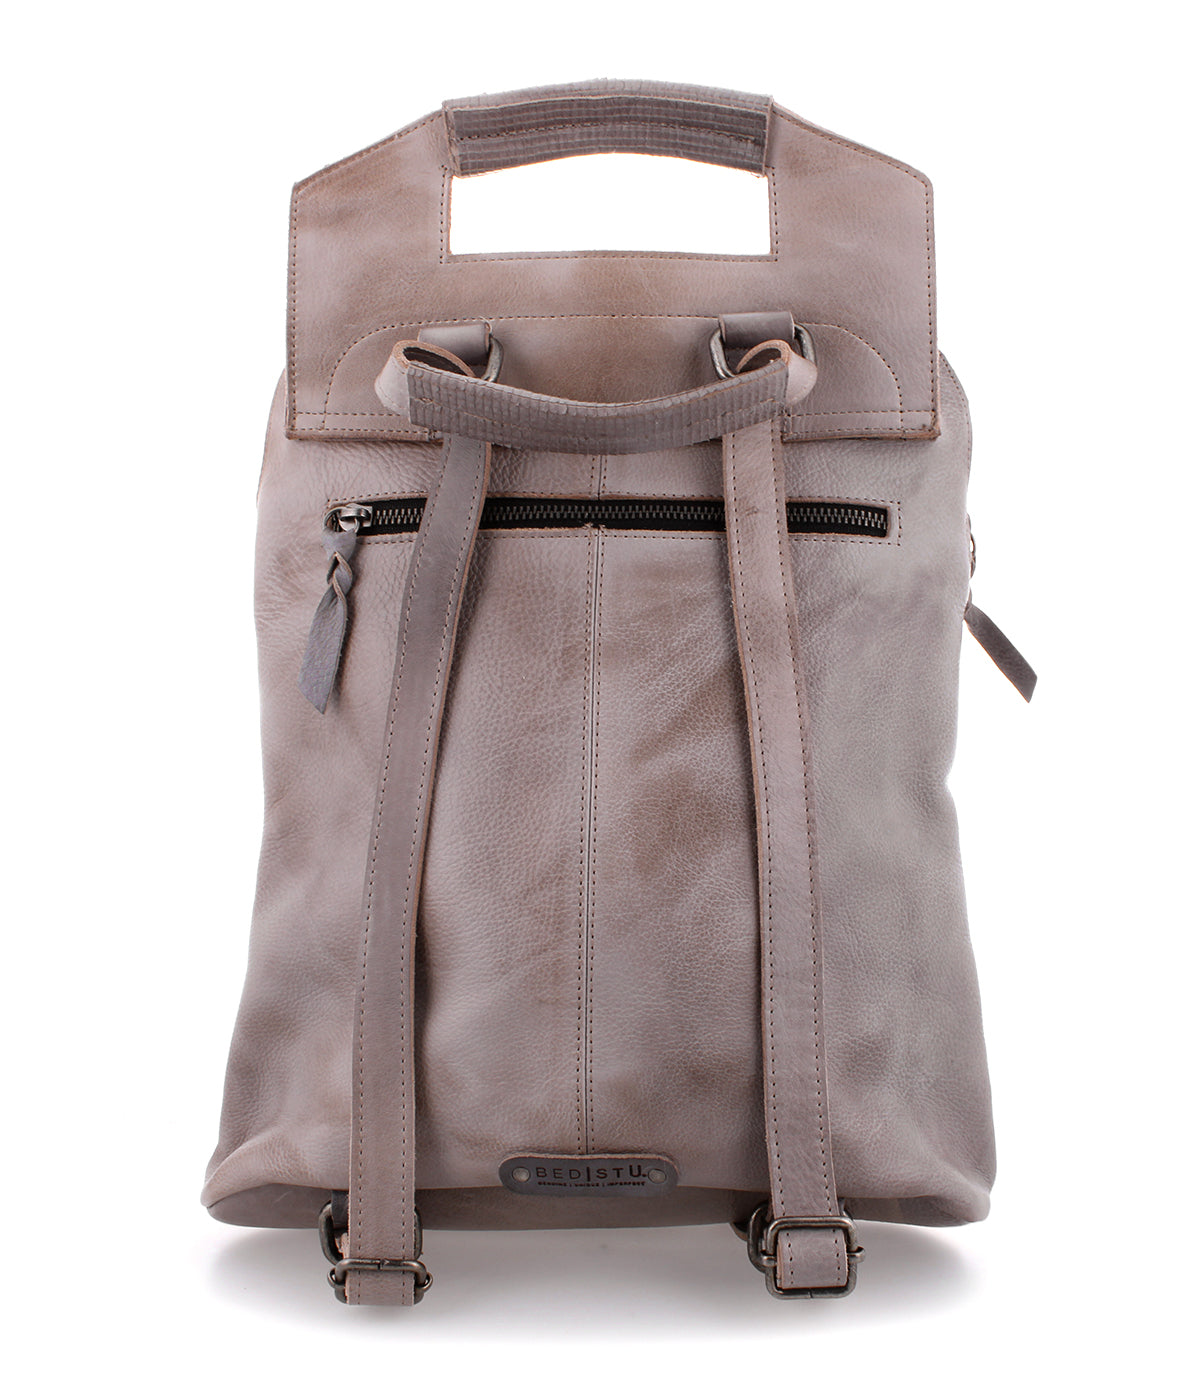 A grey leather Patsy backpack by Bed Stu with two straps and a handle.